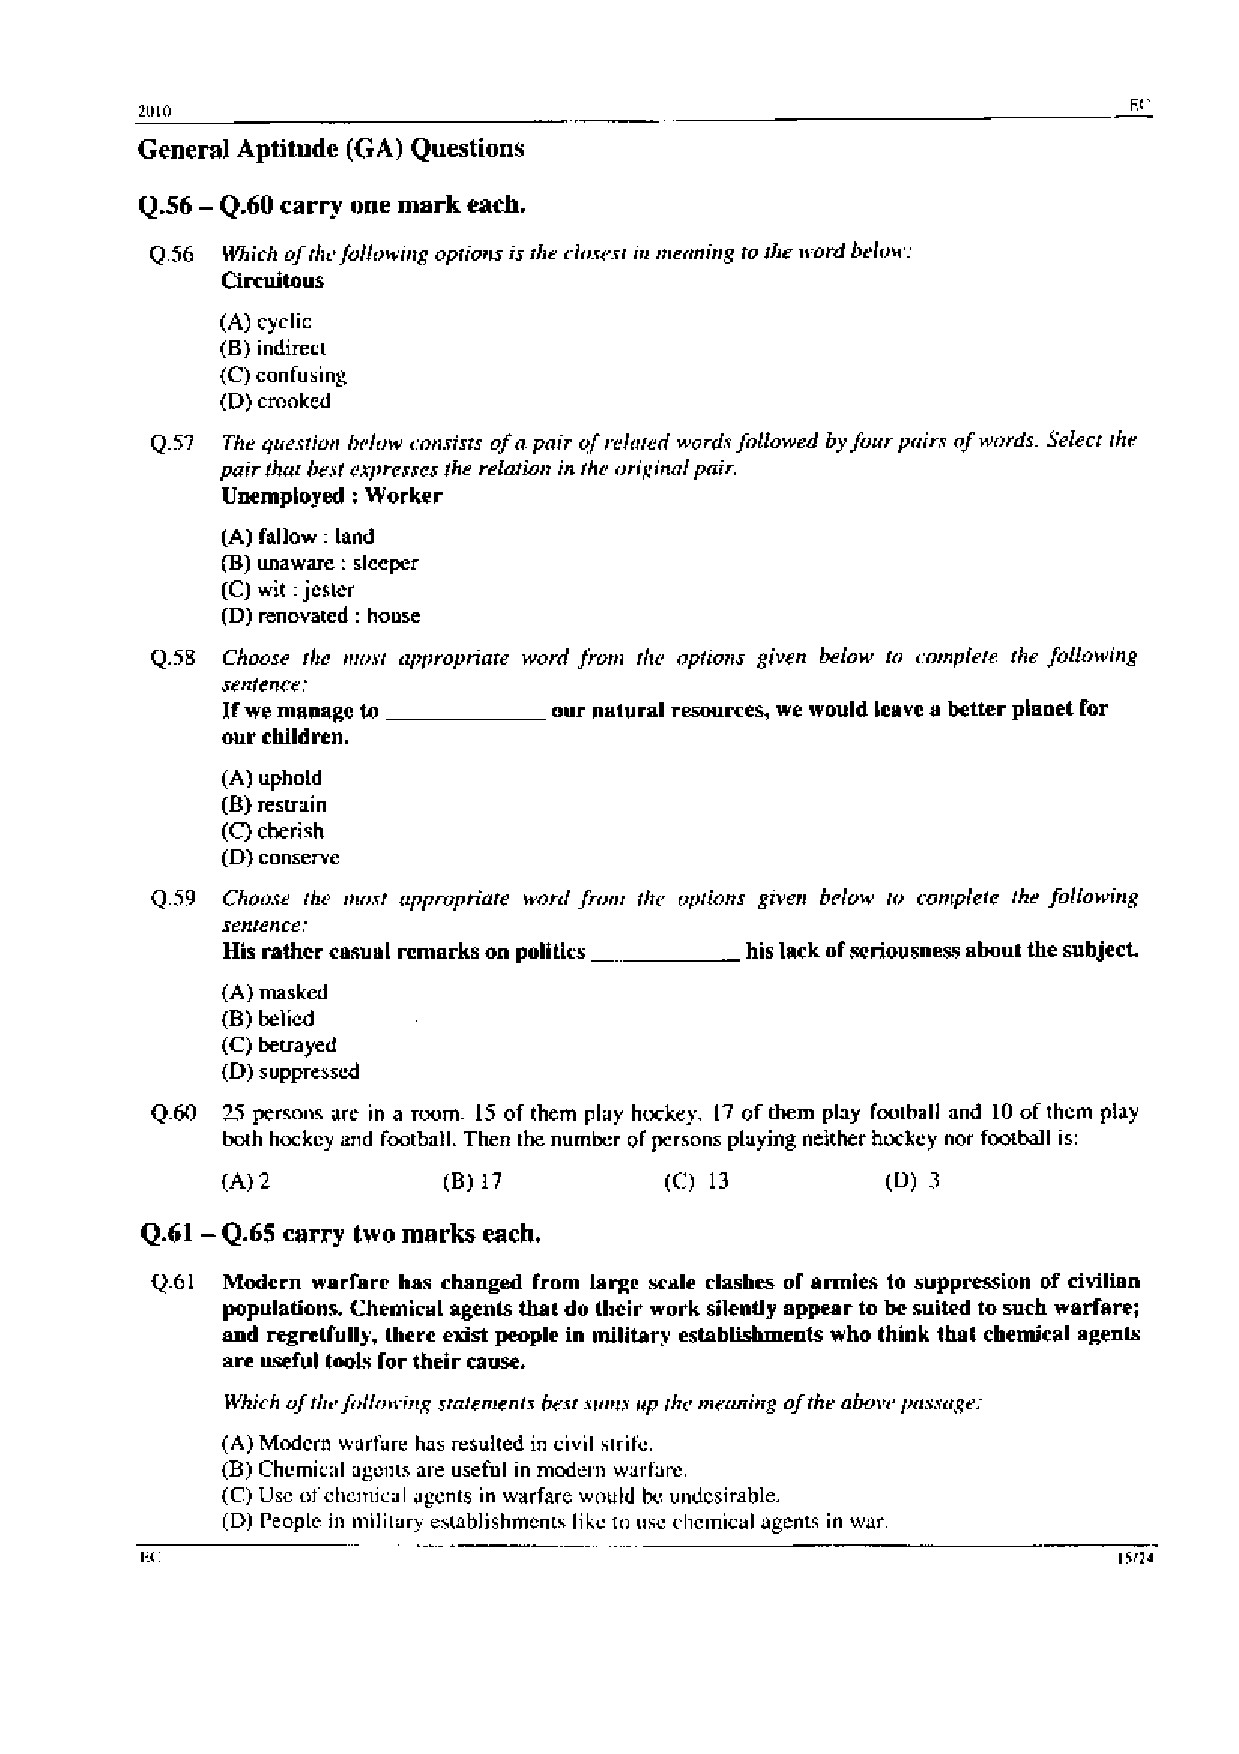 GATE Exam Question Paper 2010 Electronics and Communication Engineering 15